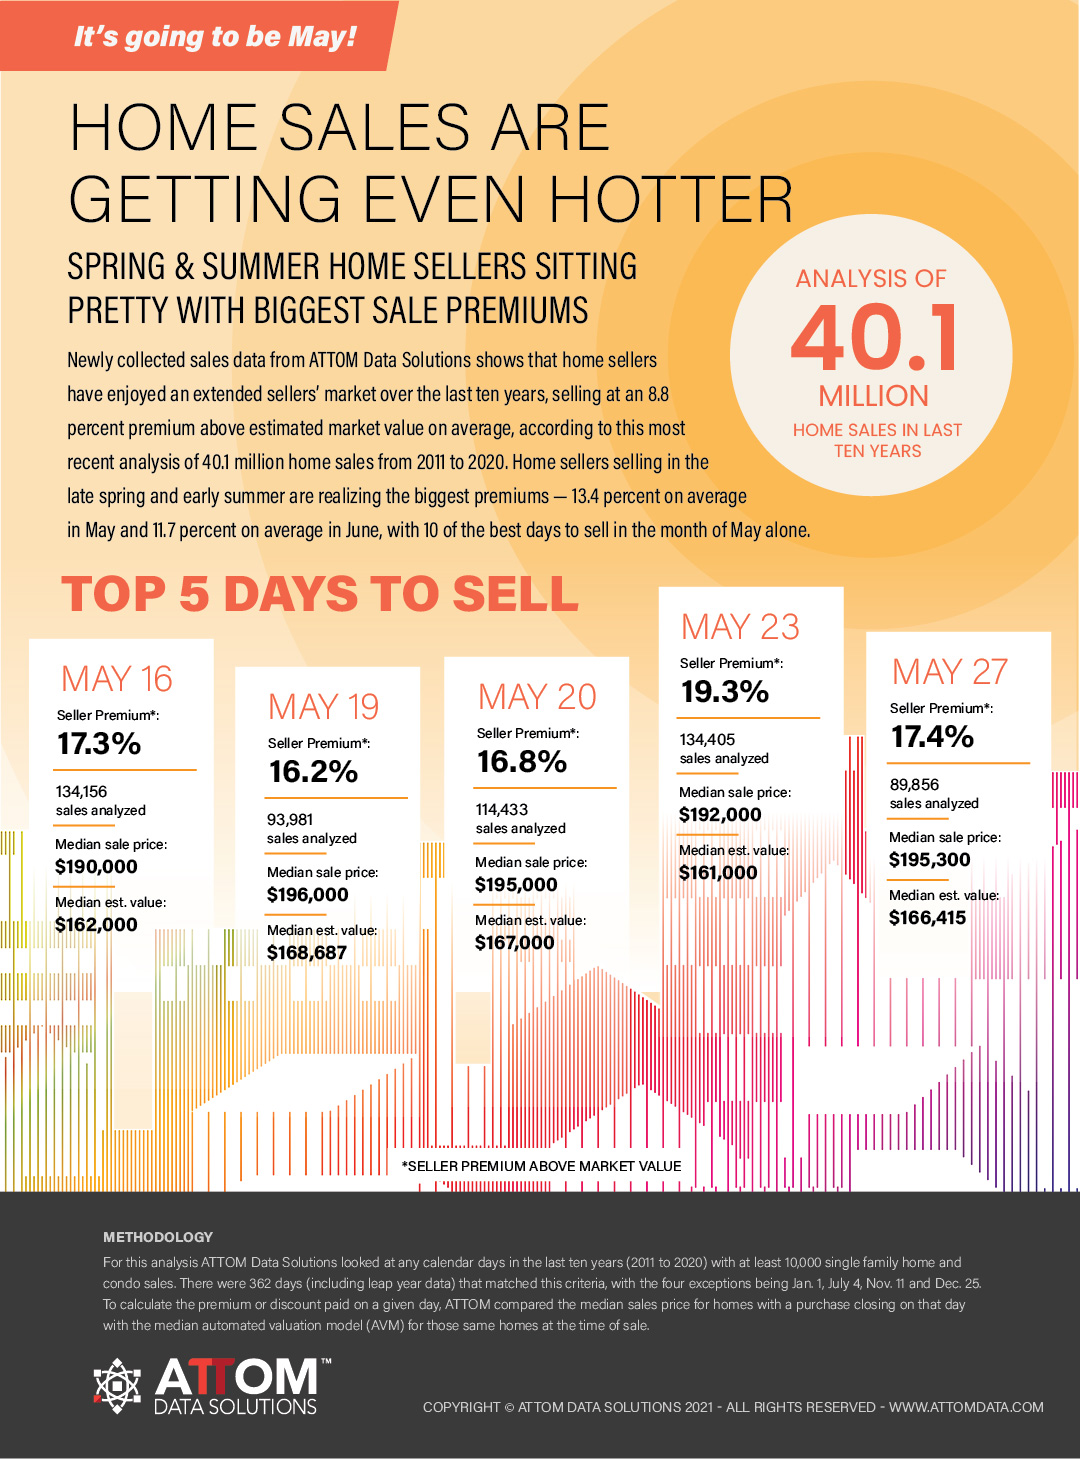 attom Best Days To Sell Infographic 2021